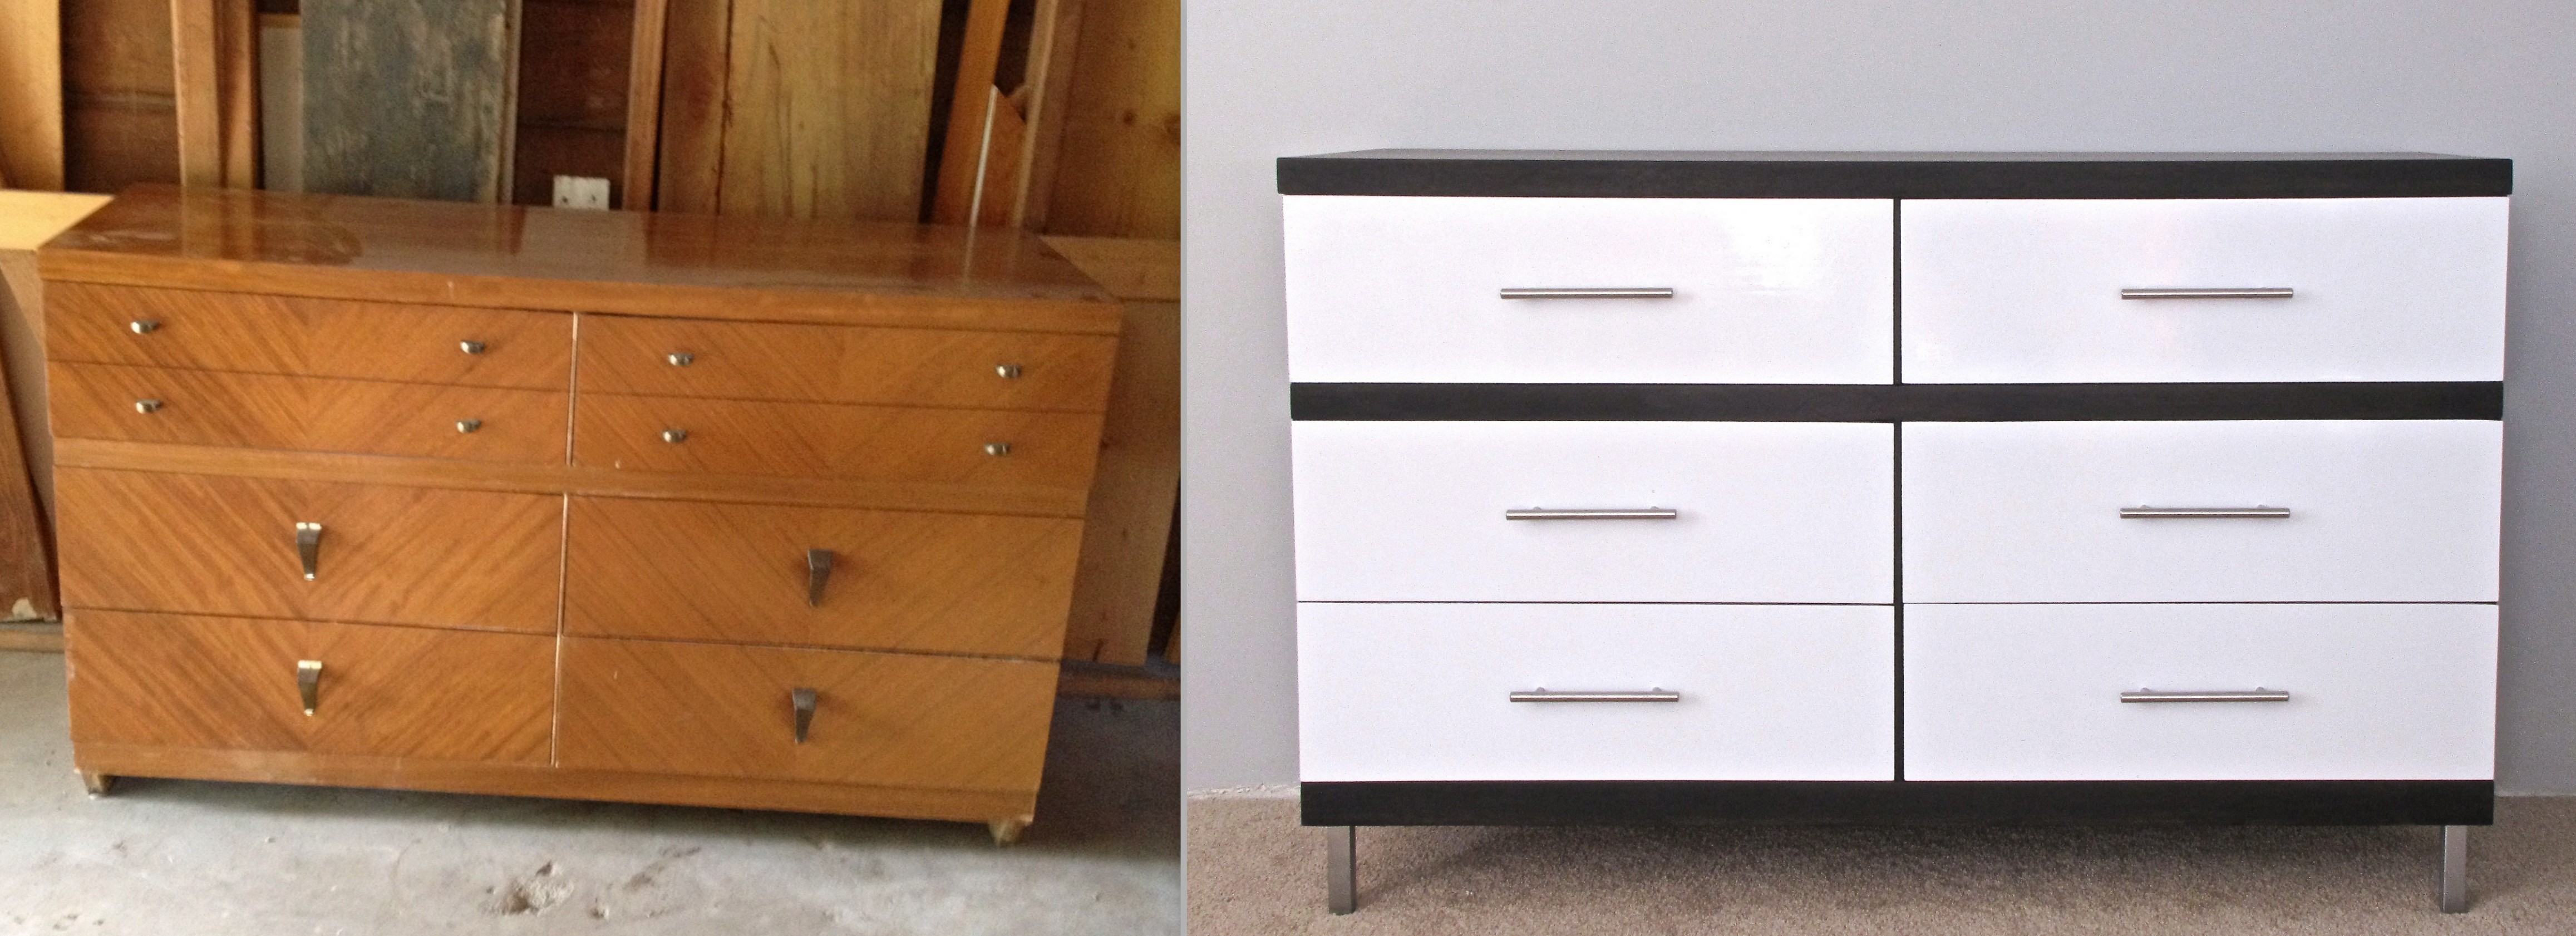 Before And After Modern White Lacquer And Dark Walnut Dresser